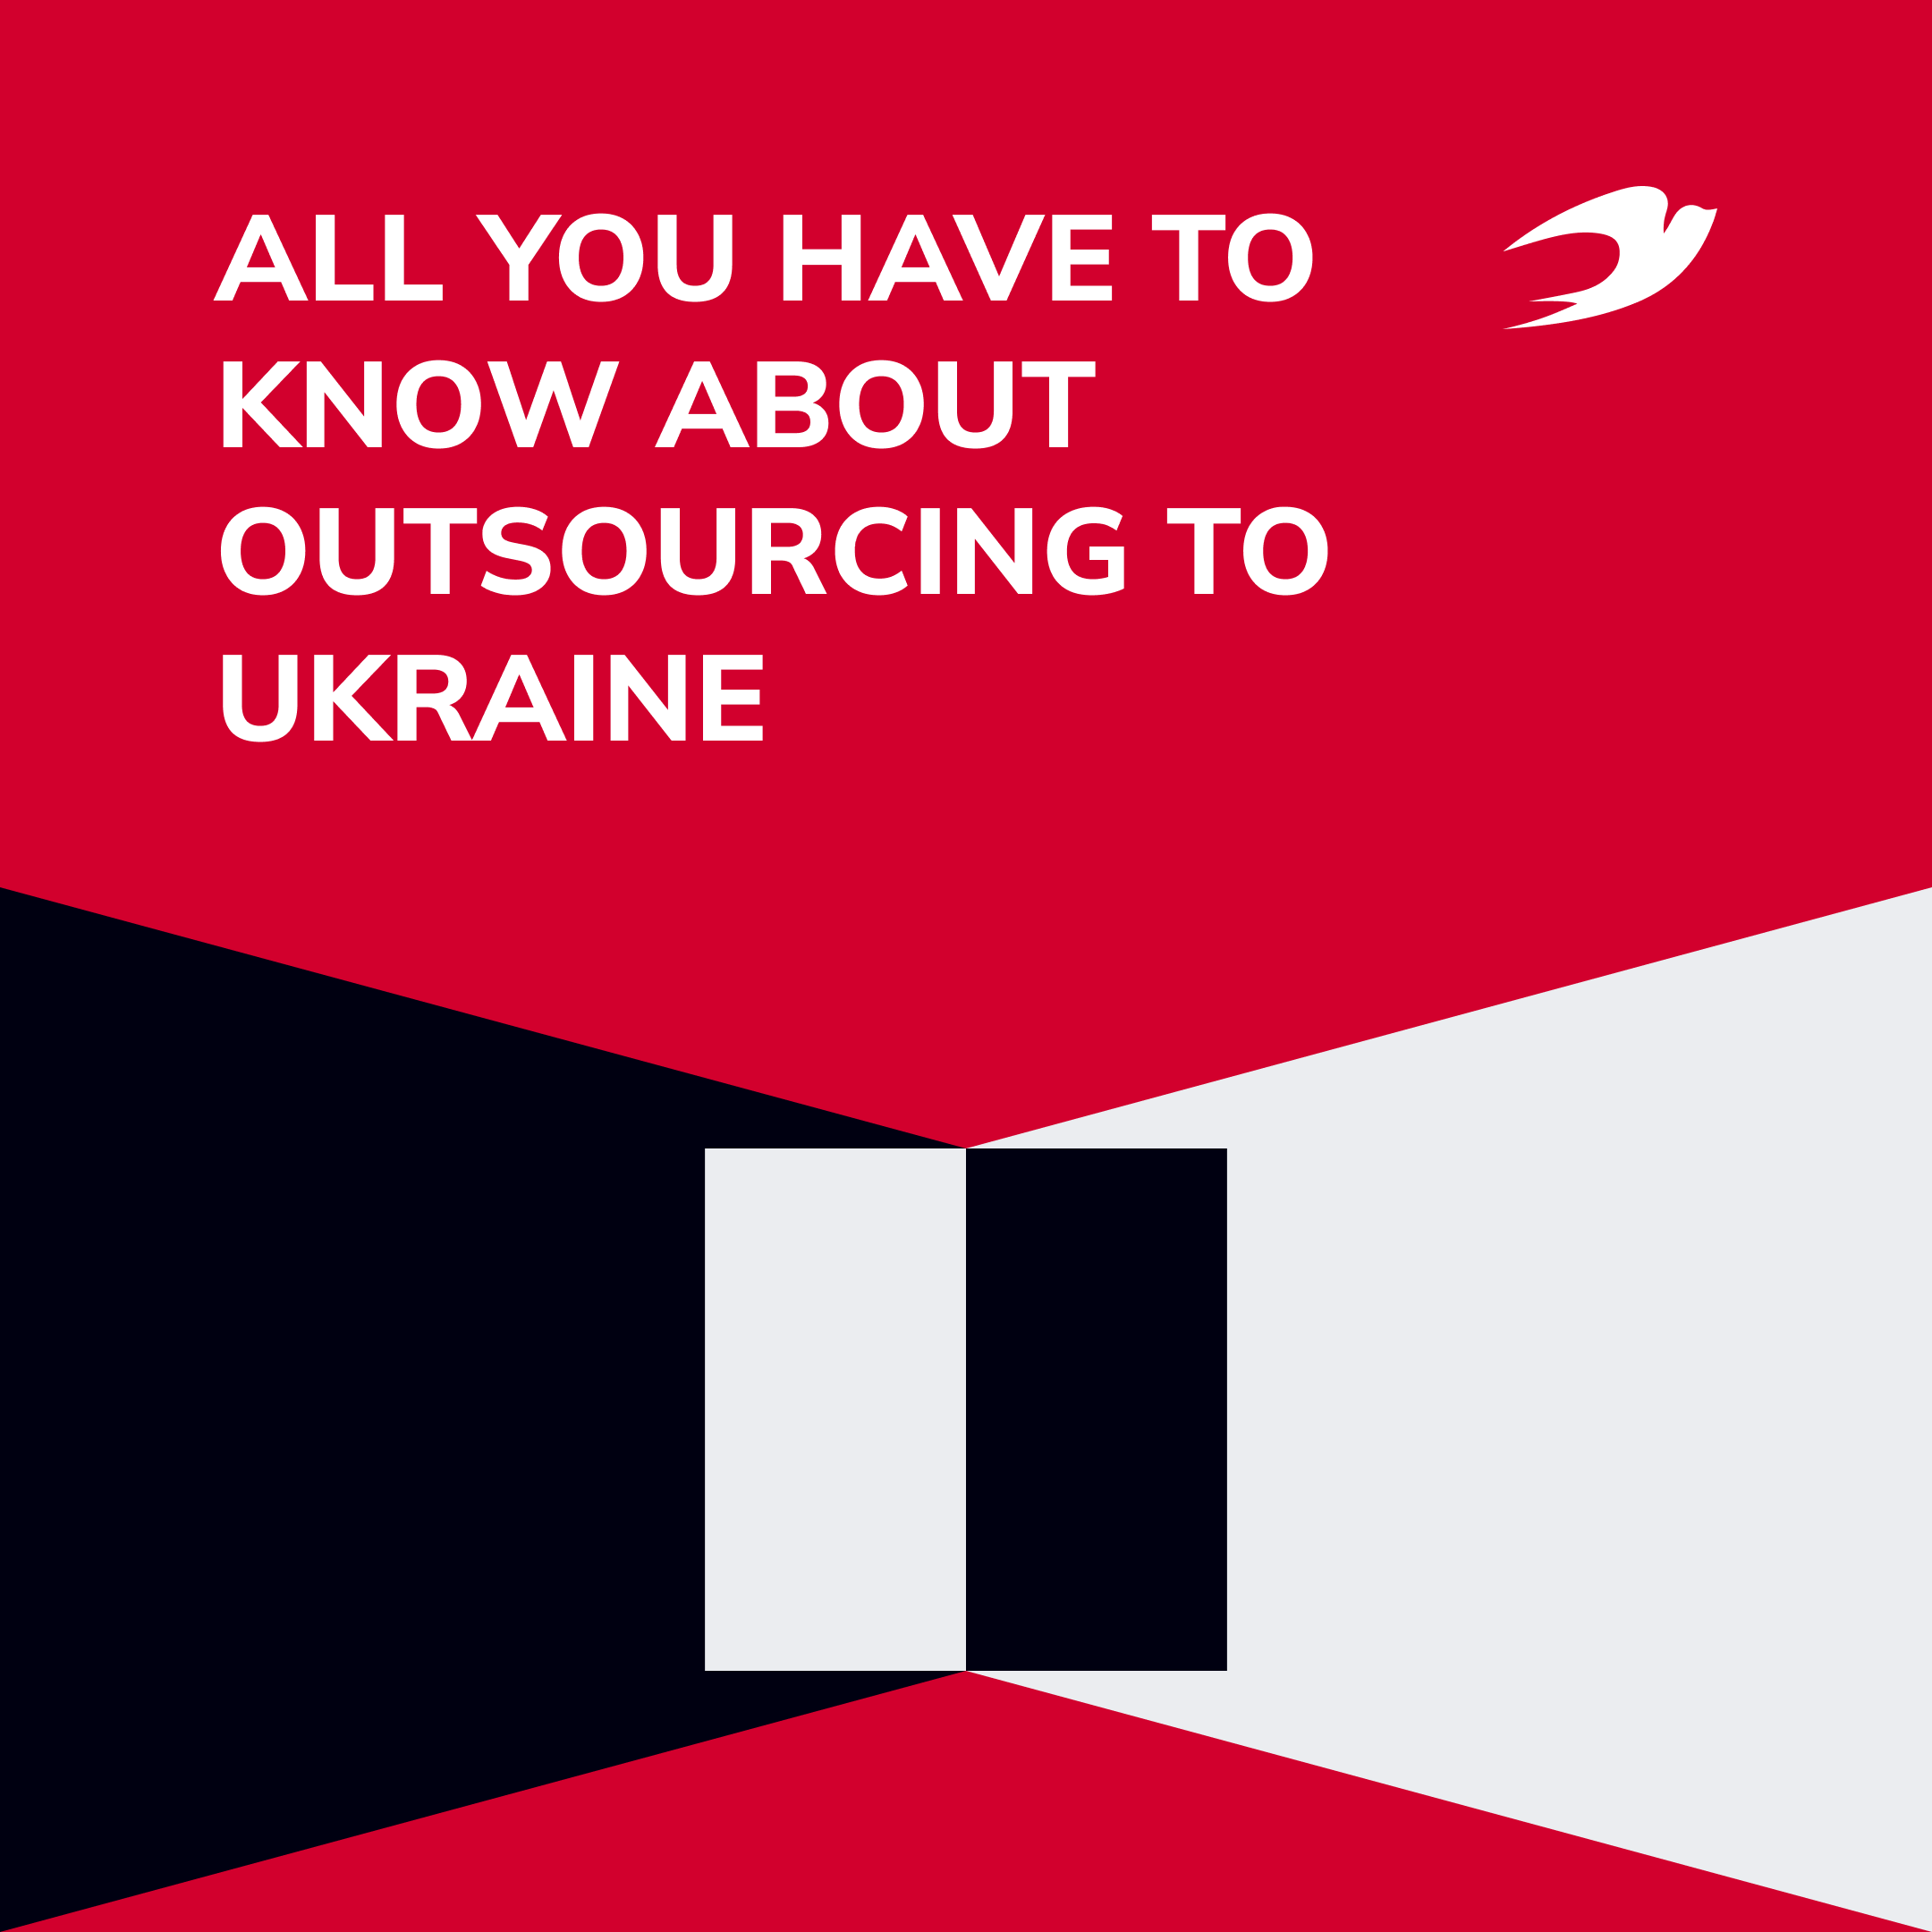 All You Have to Know About Outsourcing to Ukraine